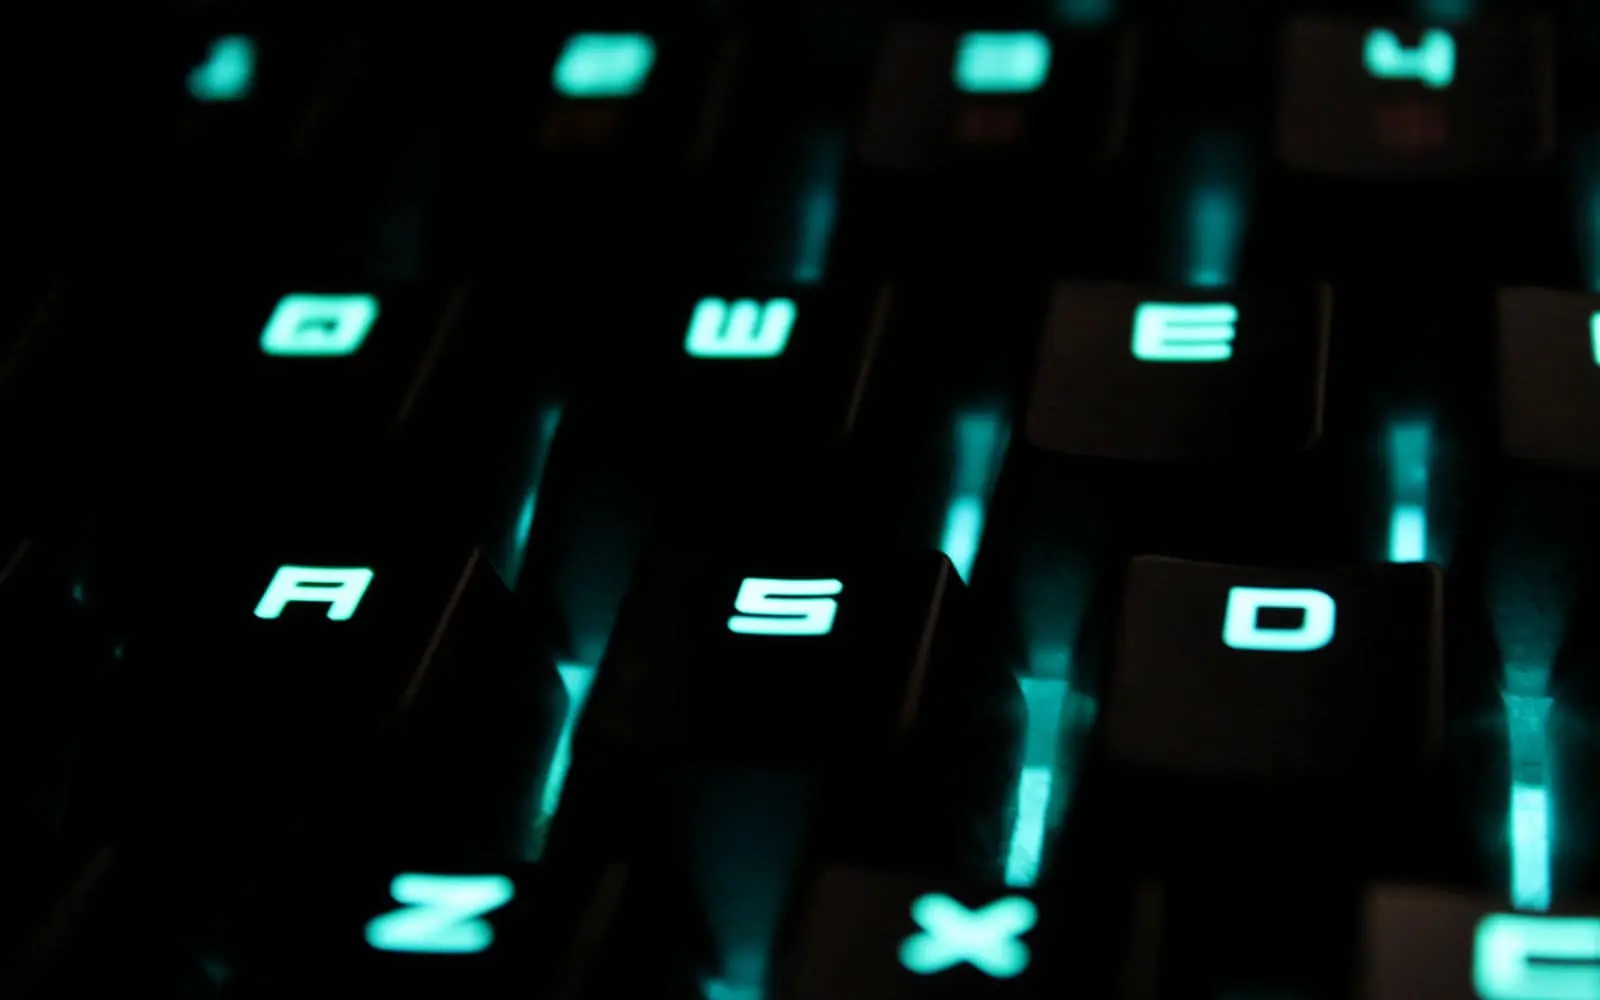 Lit up buttons on a keyboard